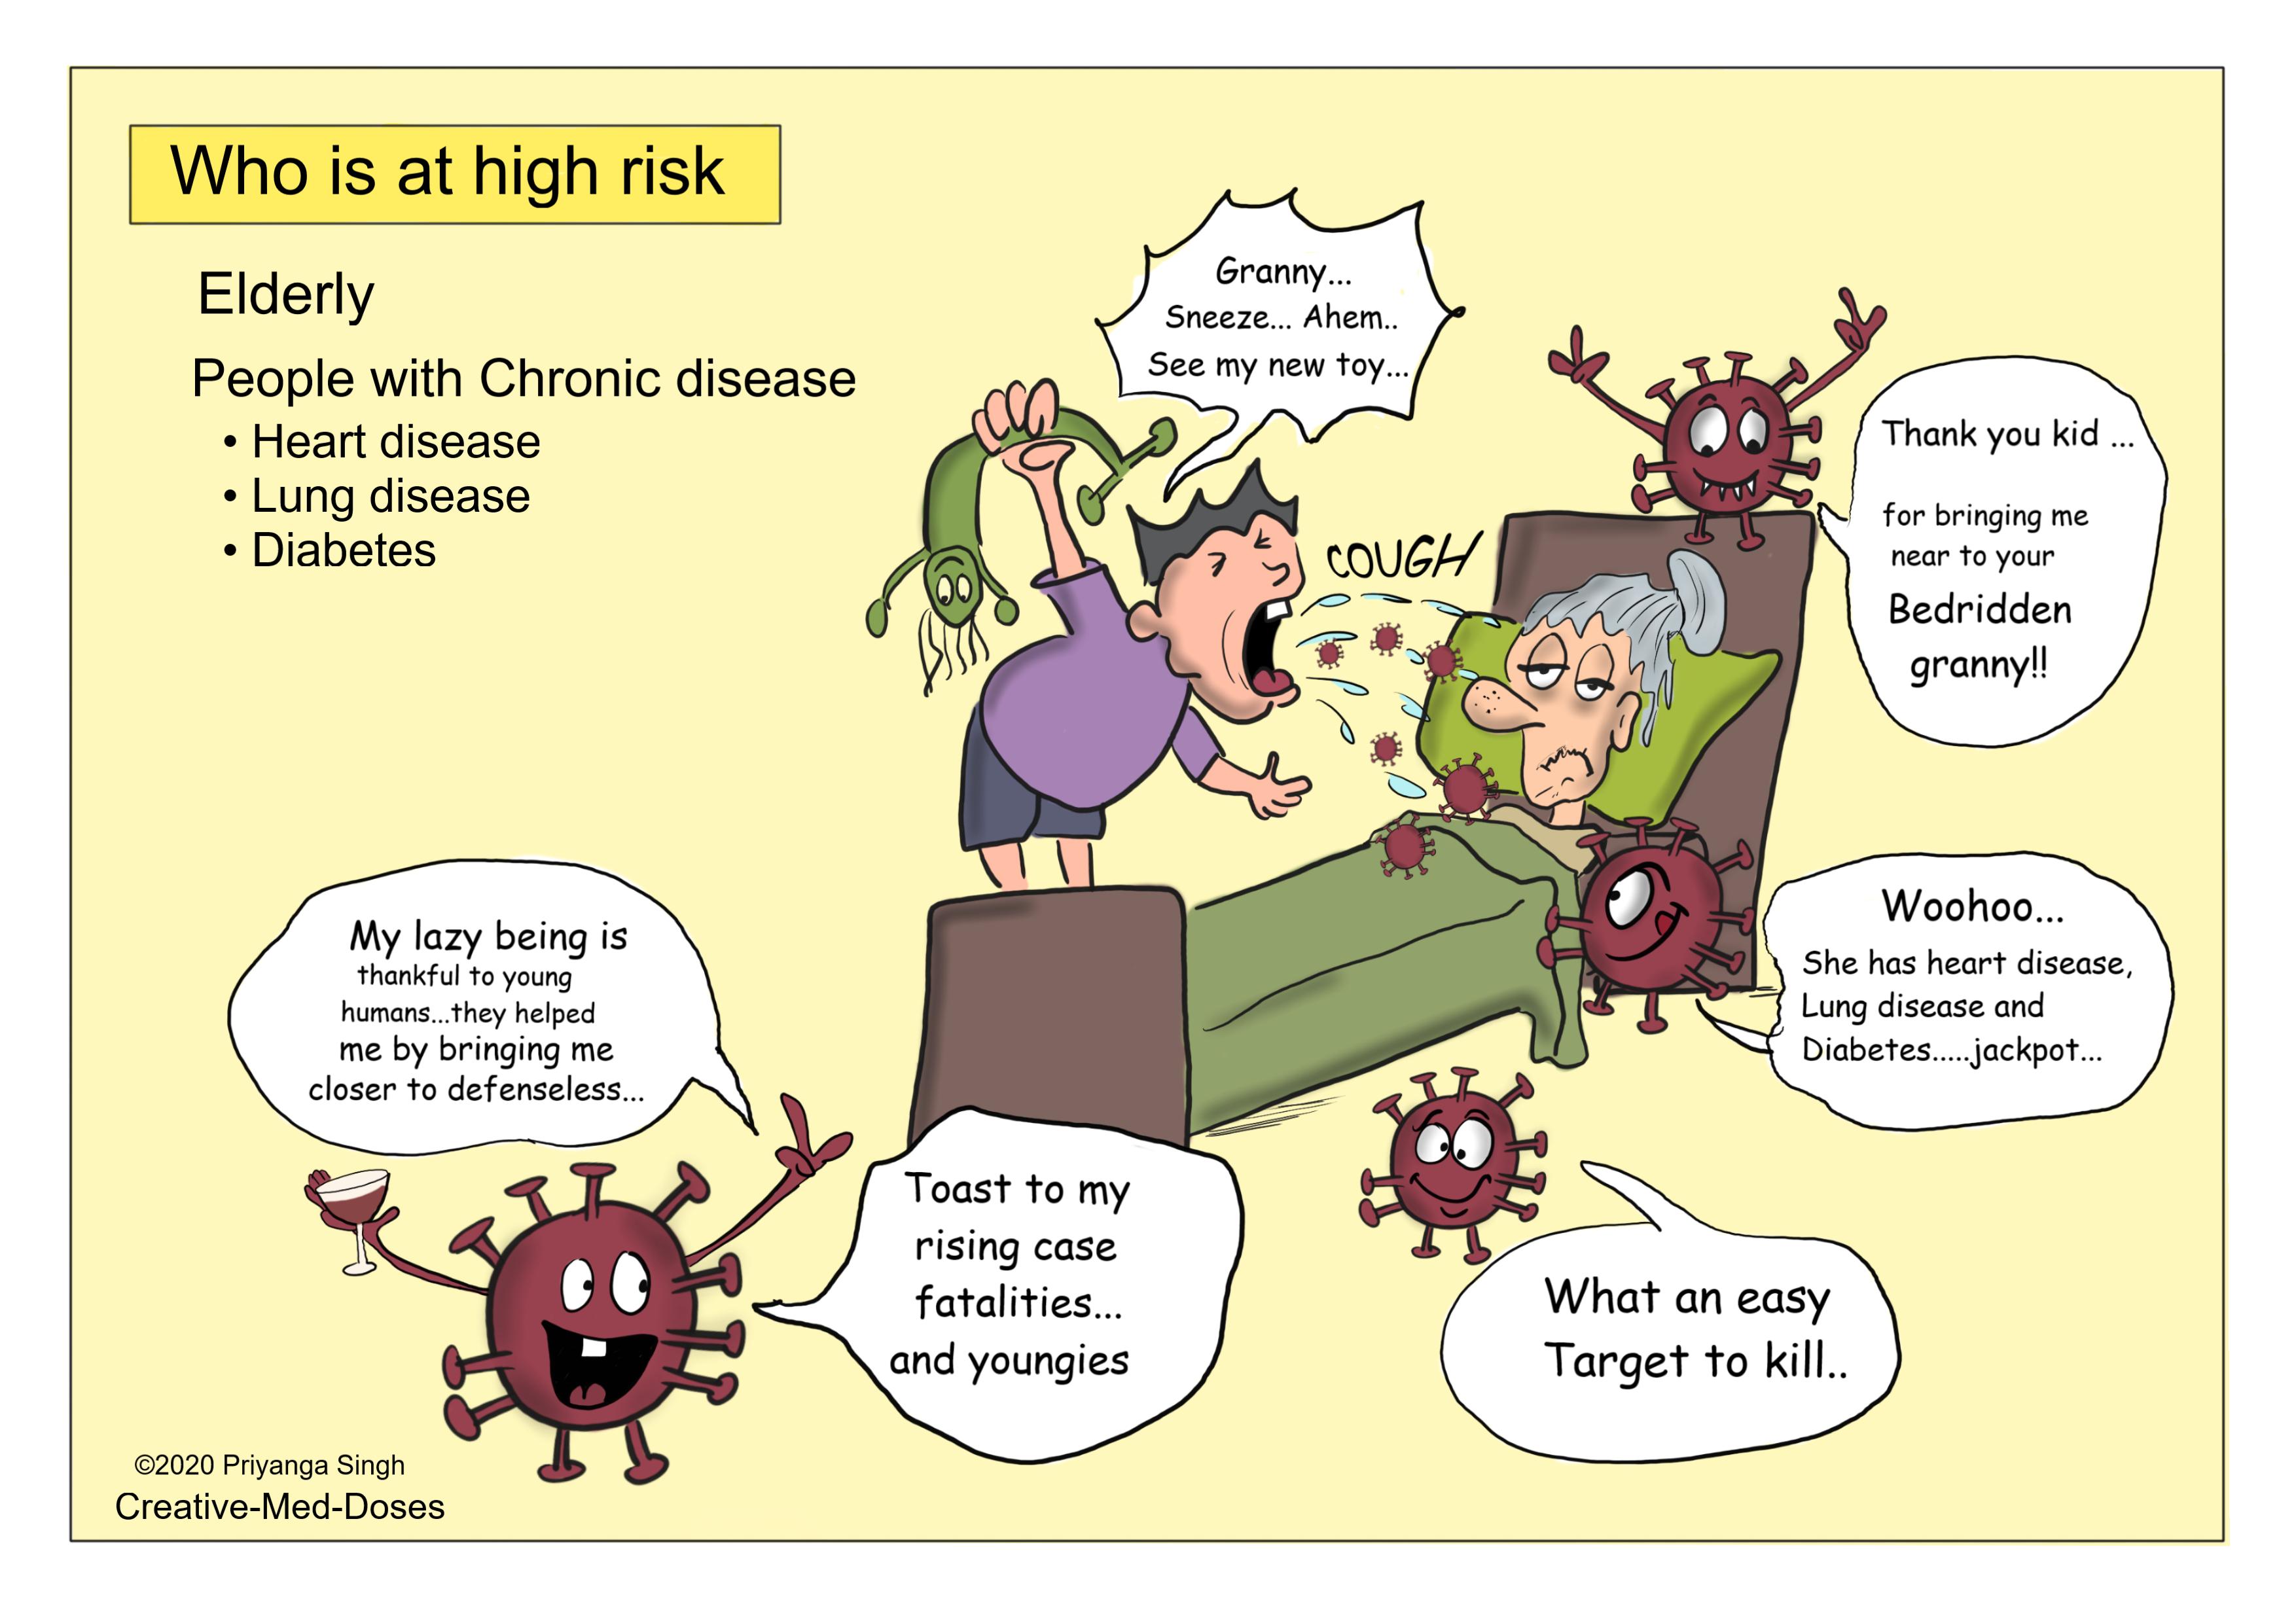 covid-19: High risk group